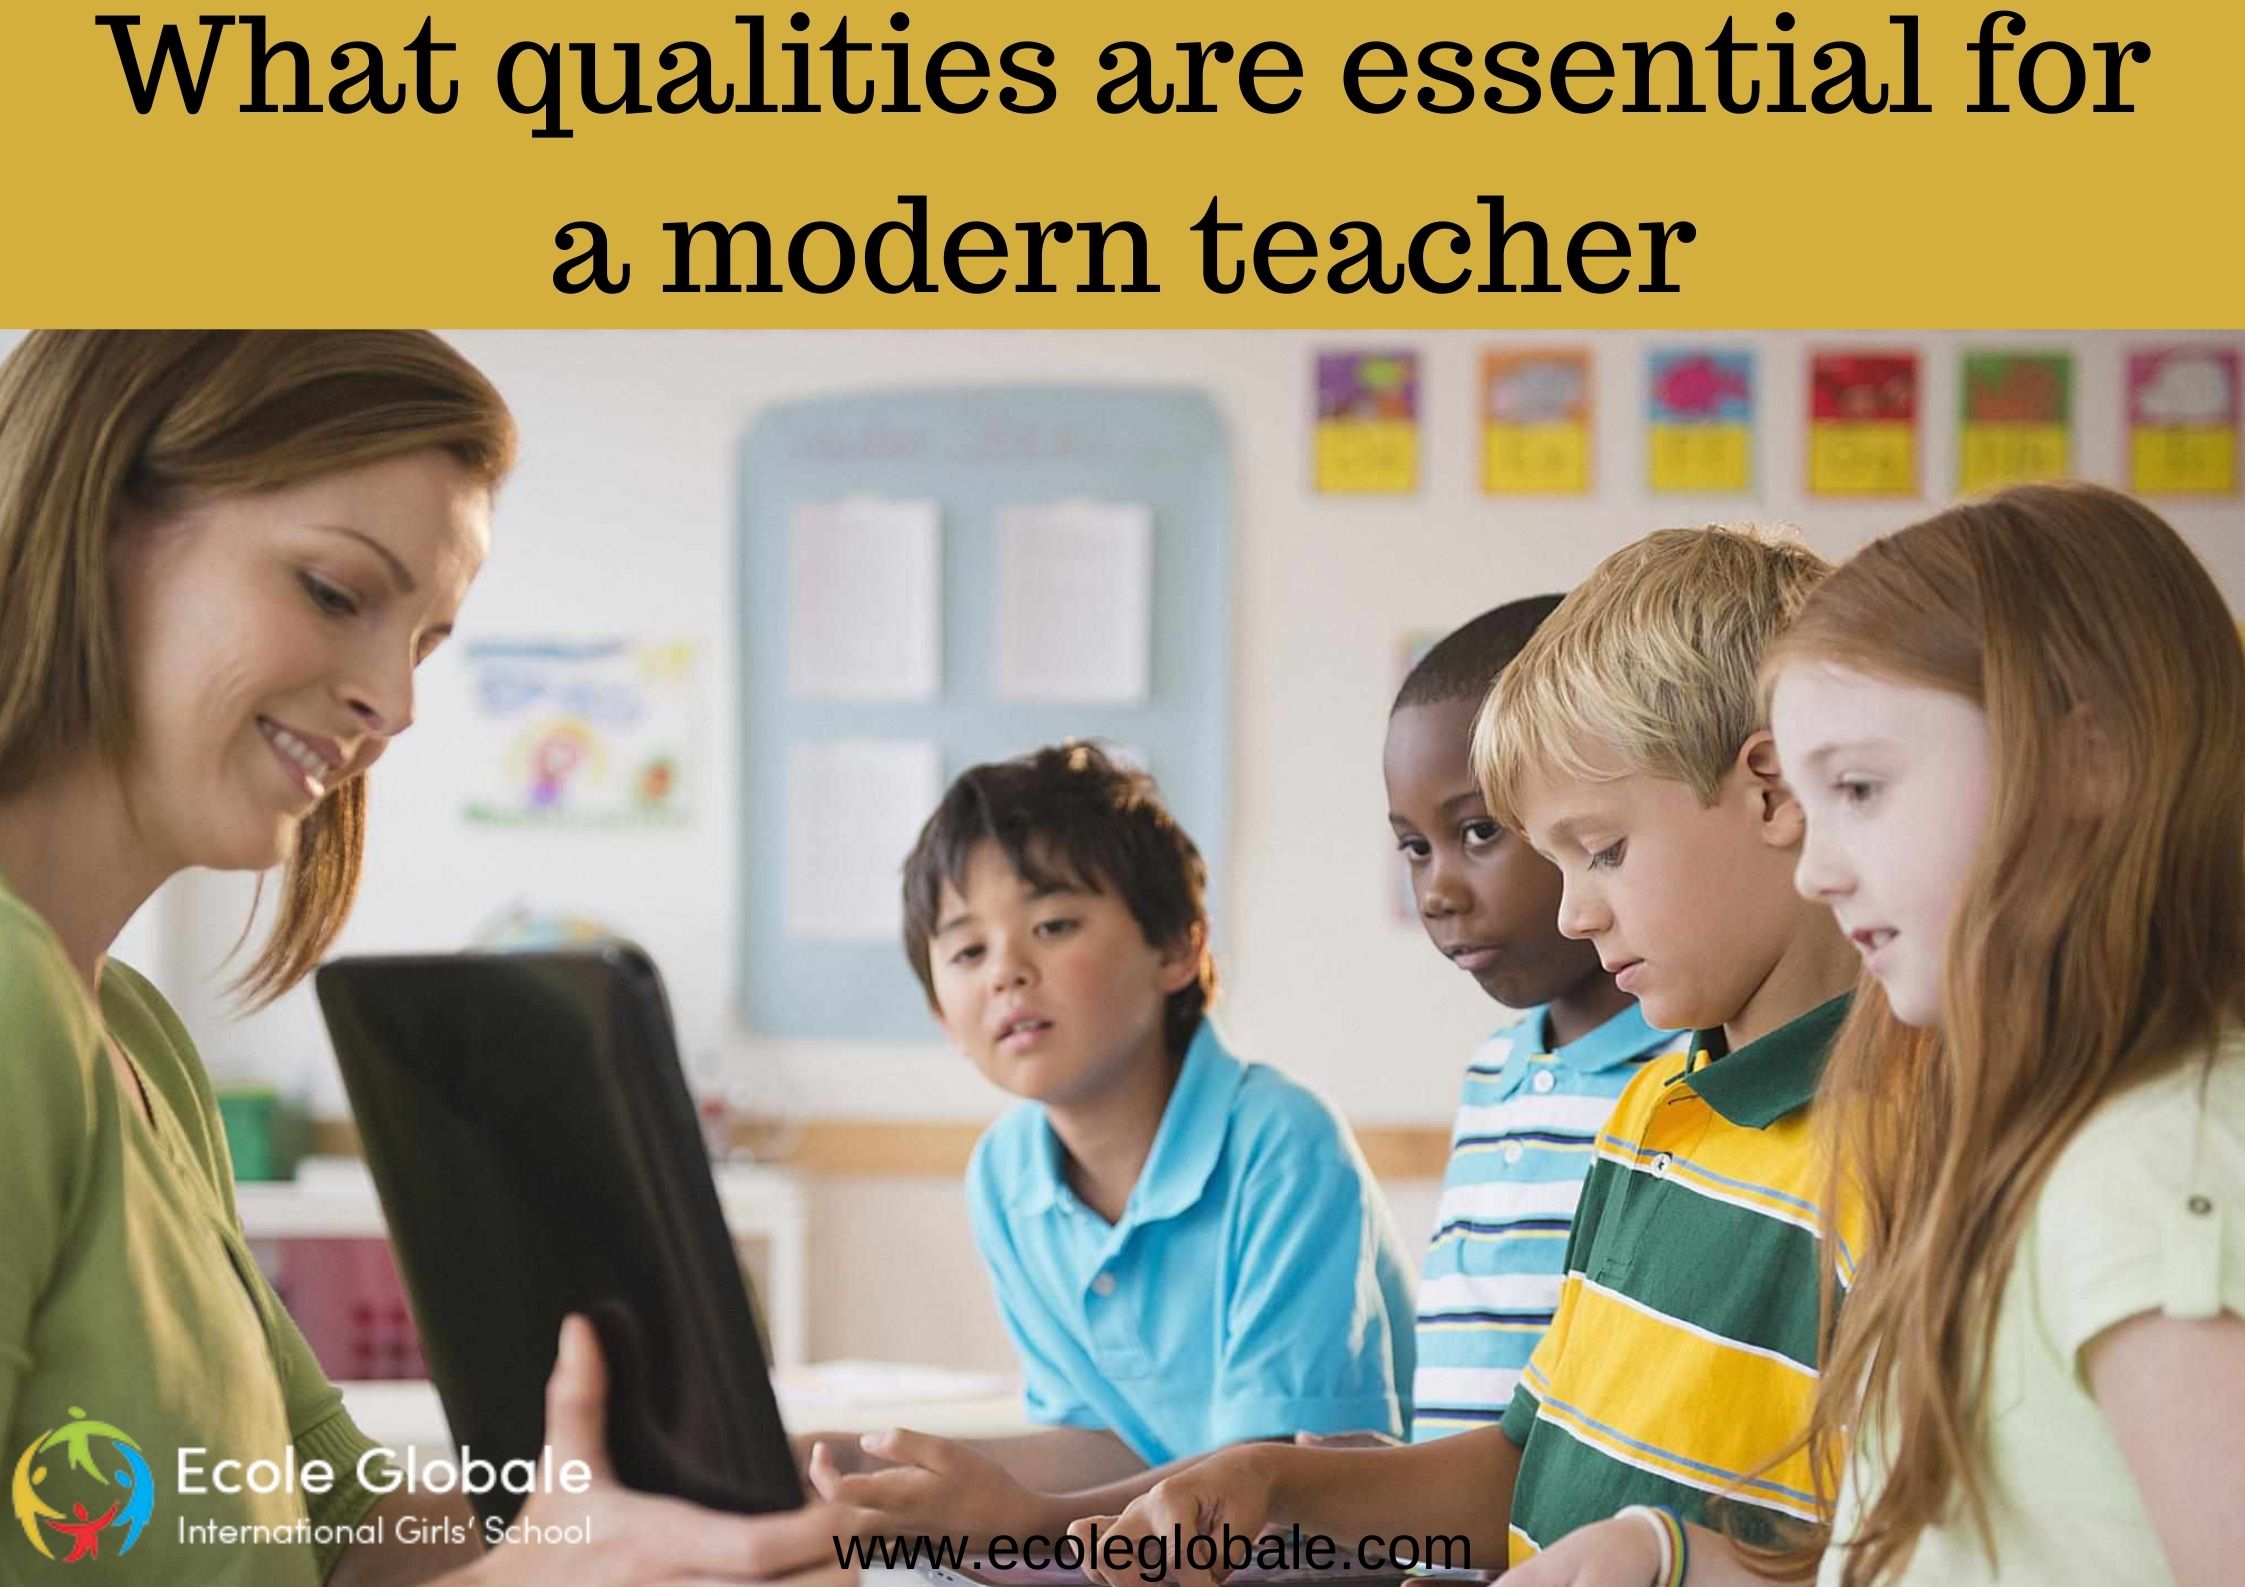 What qualities are essential for a modern teacher